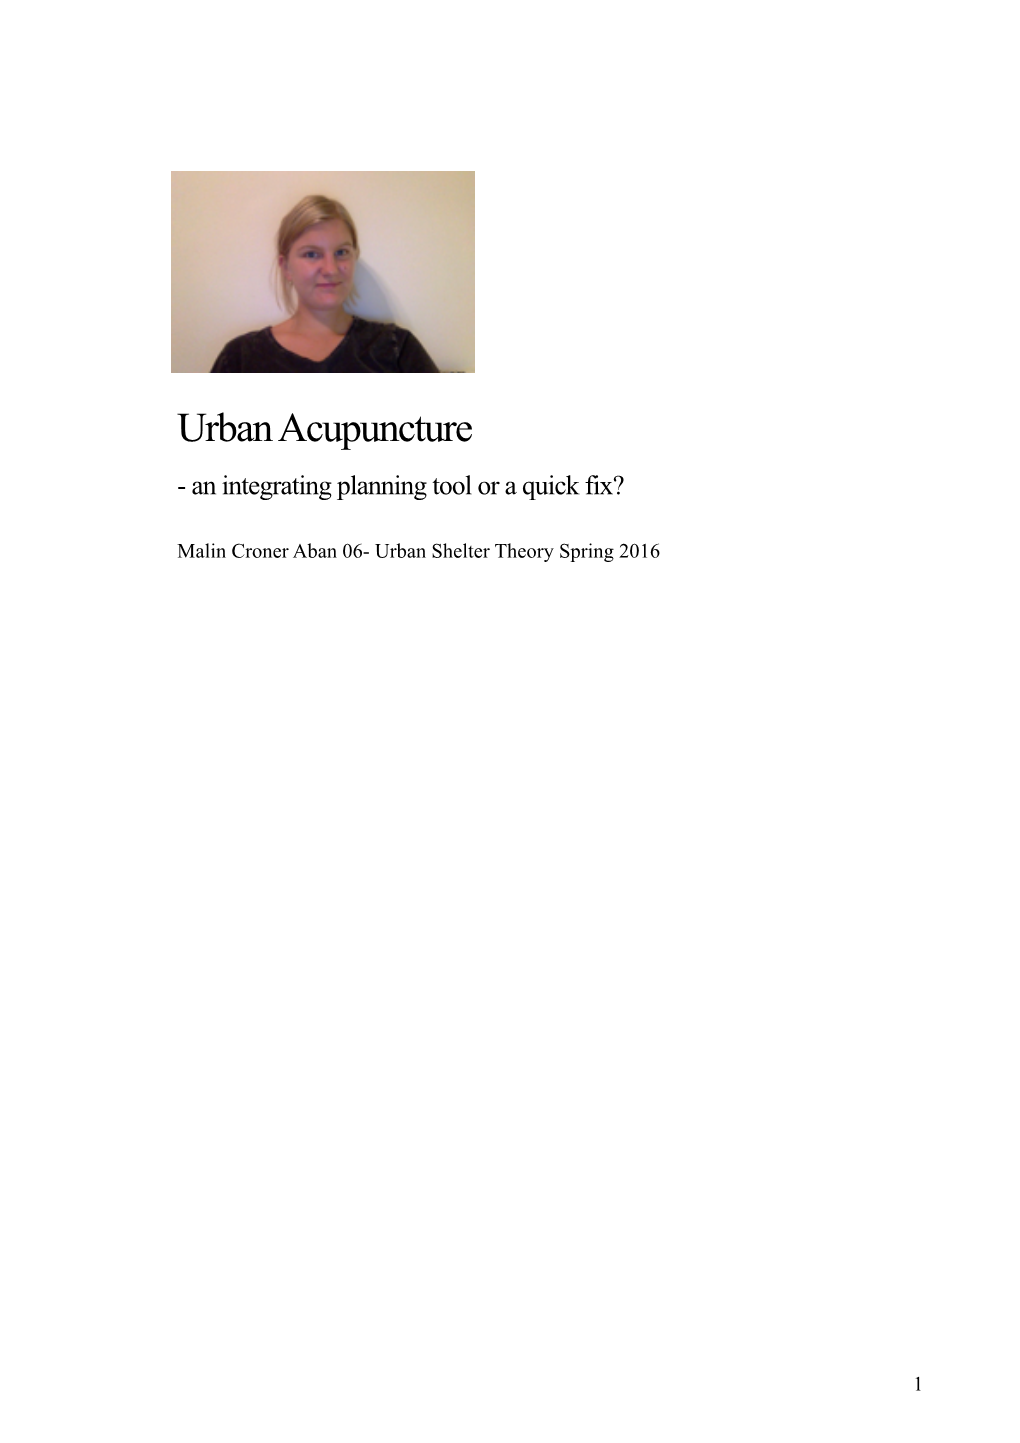 Urban Acupuncture - an Integrating Planning Tool Or a Quick Fix?